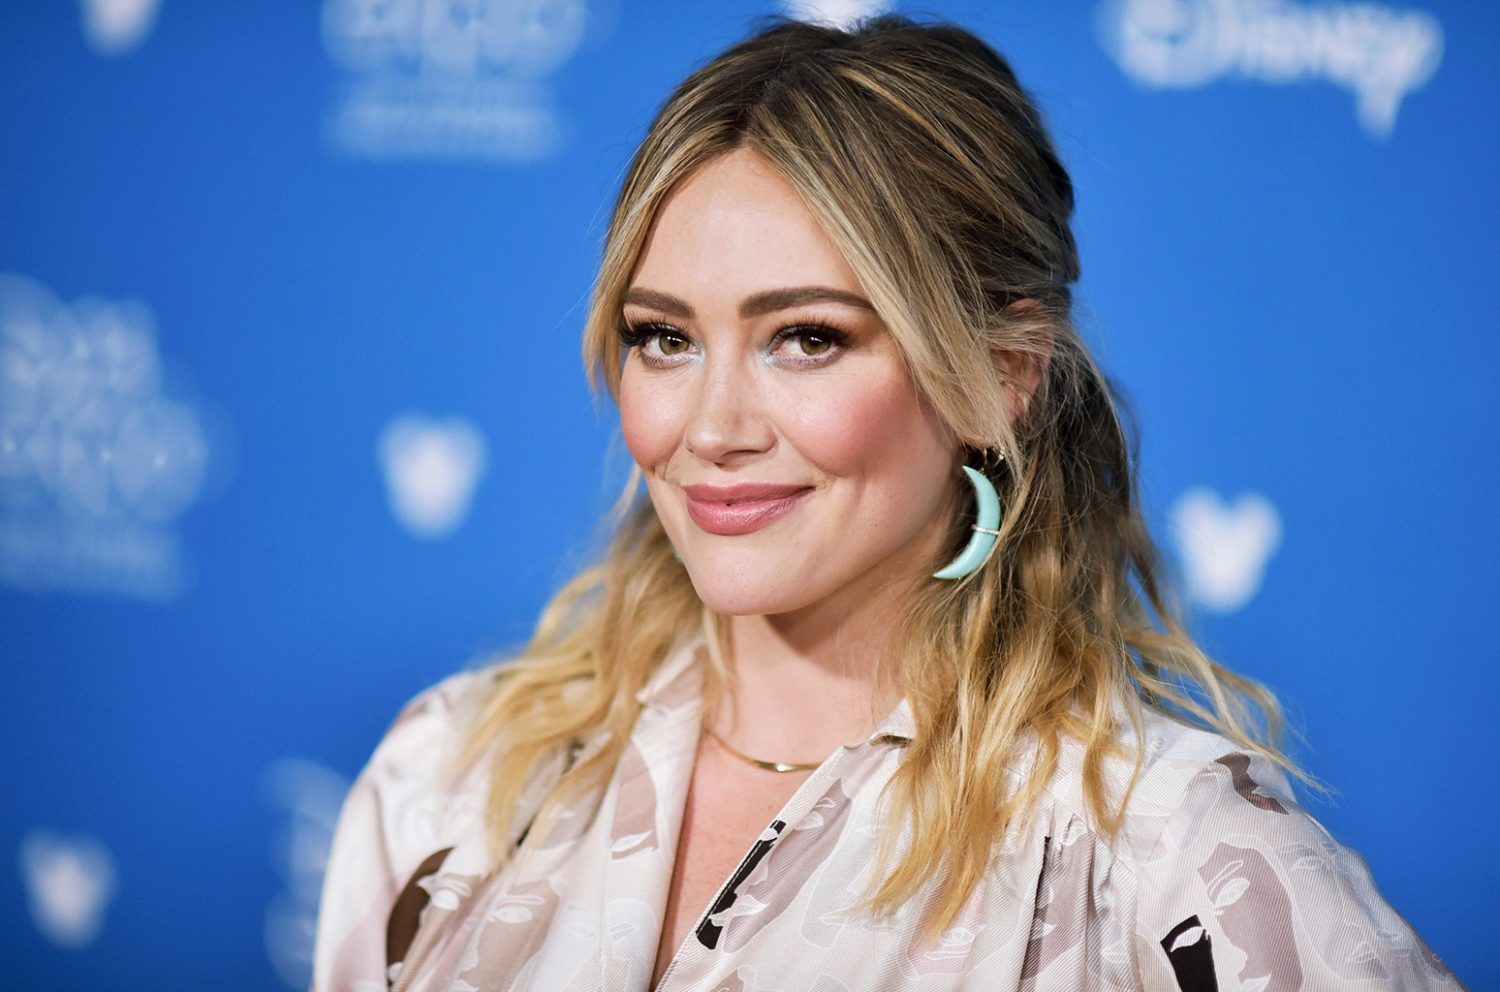 Hilary Duff Says It "was Scary" To Pose Nude But She "felt Strong And Beautiful"